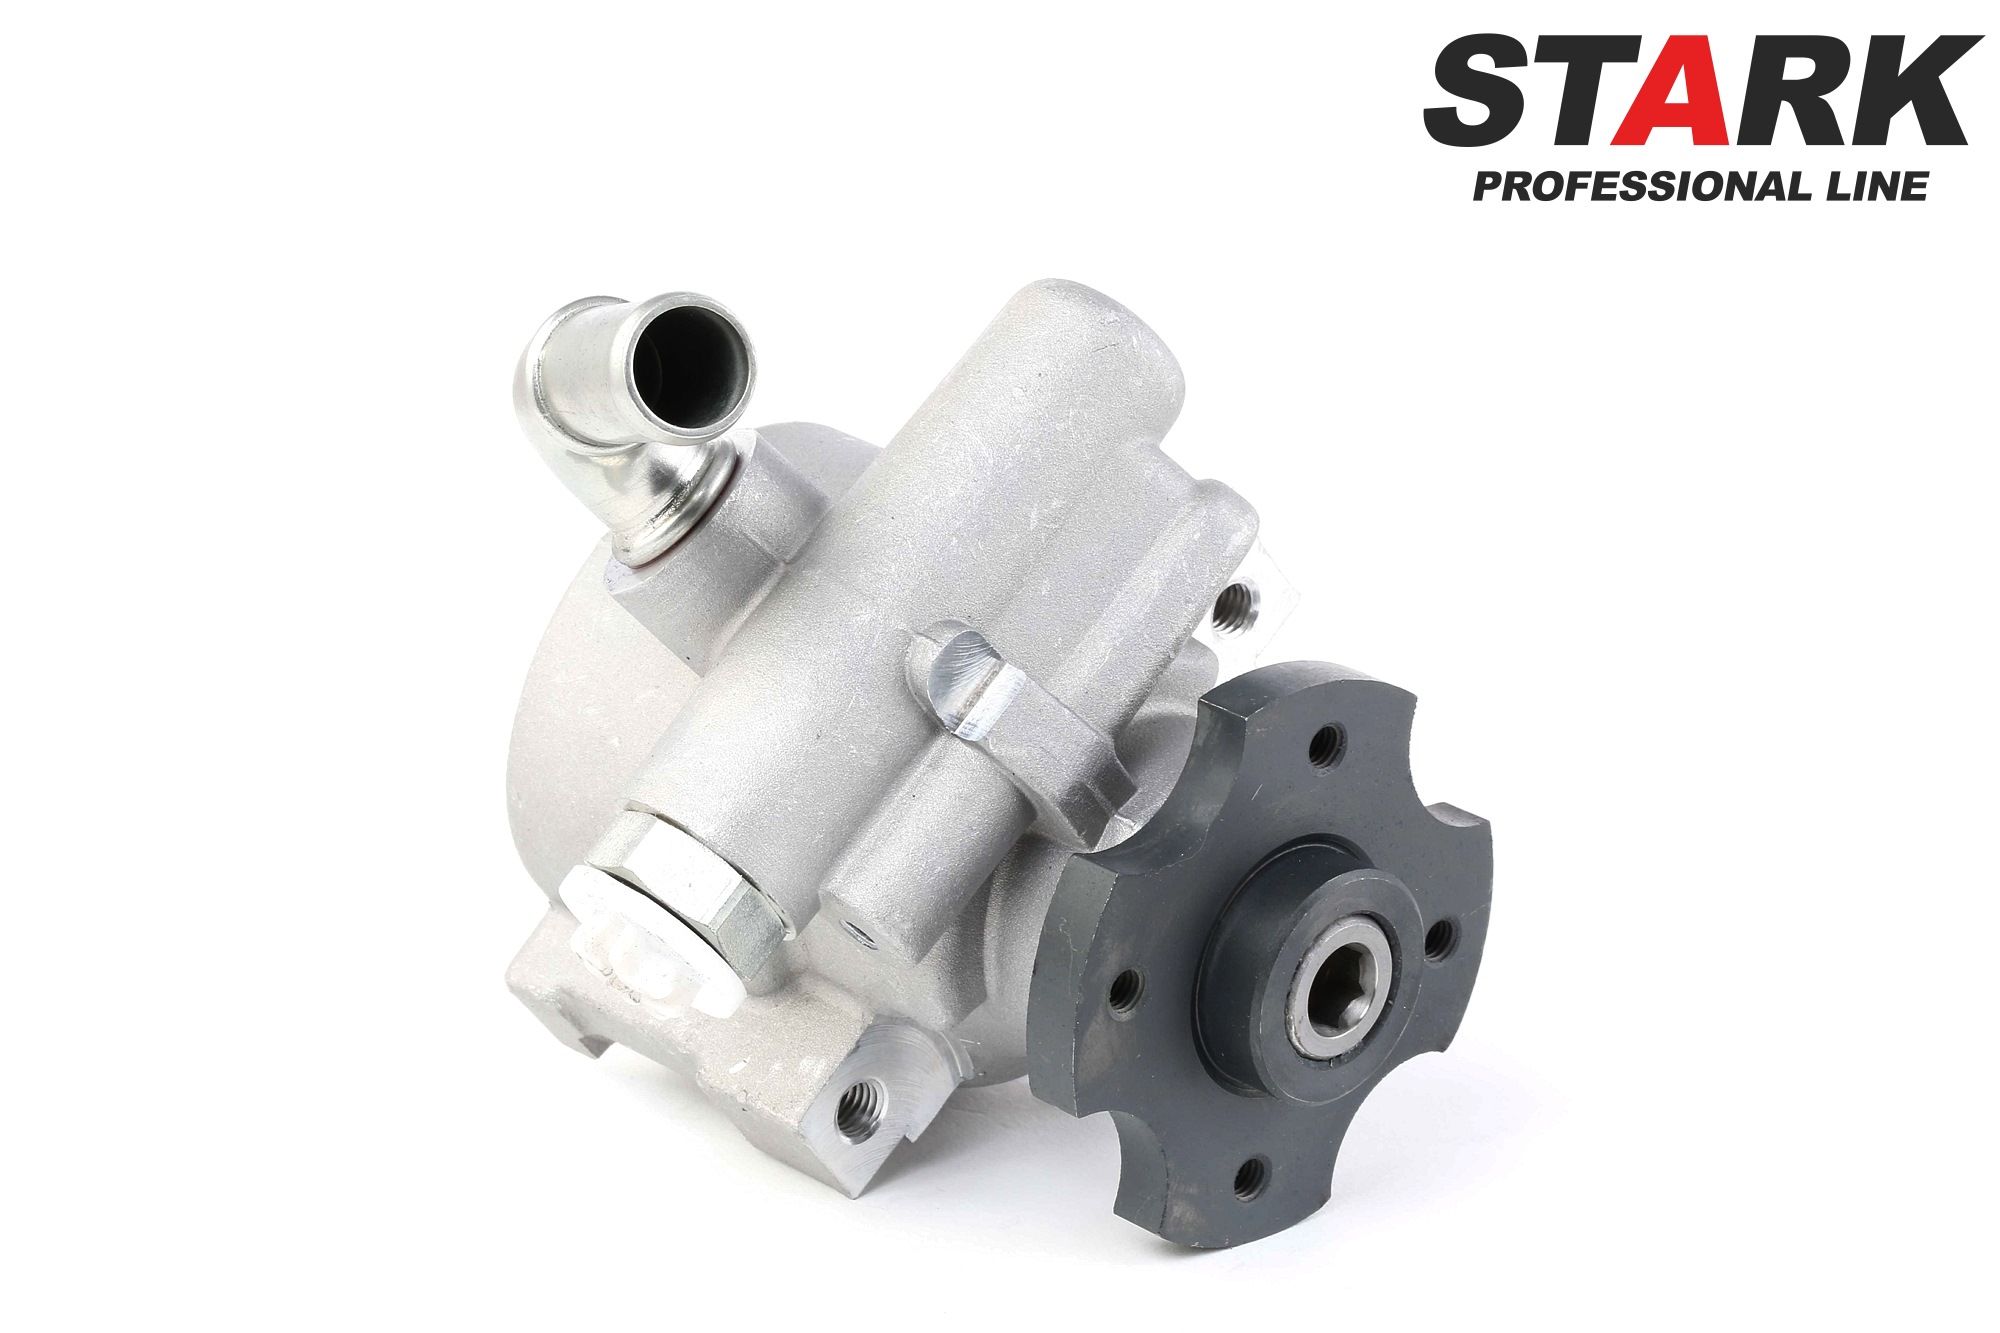 STARK SKHP-0540100 Power steering pump Hydraulic, 80 bar, for left-hand/right-hand drive vehicles